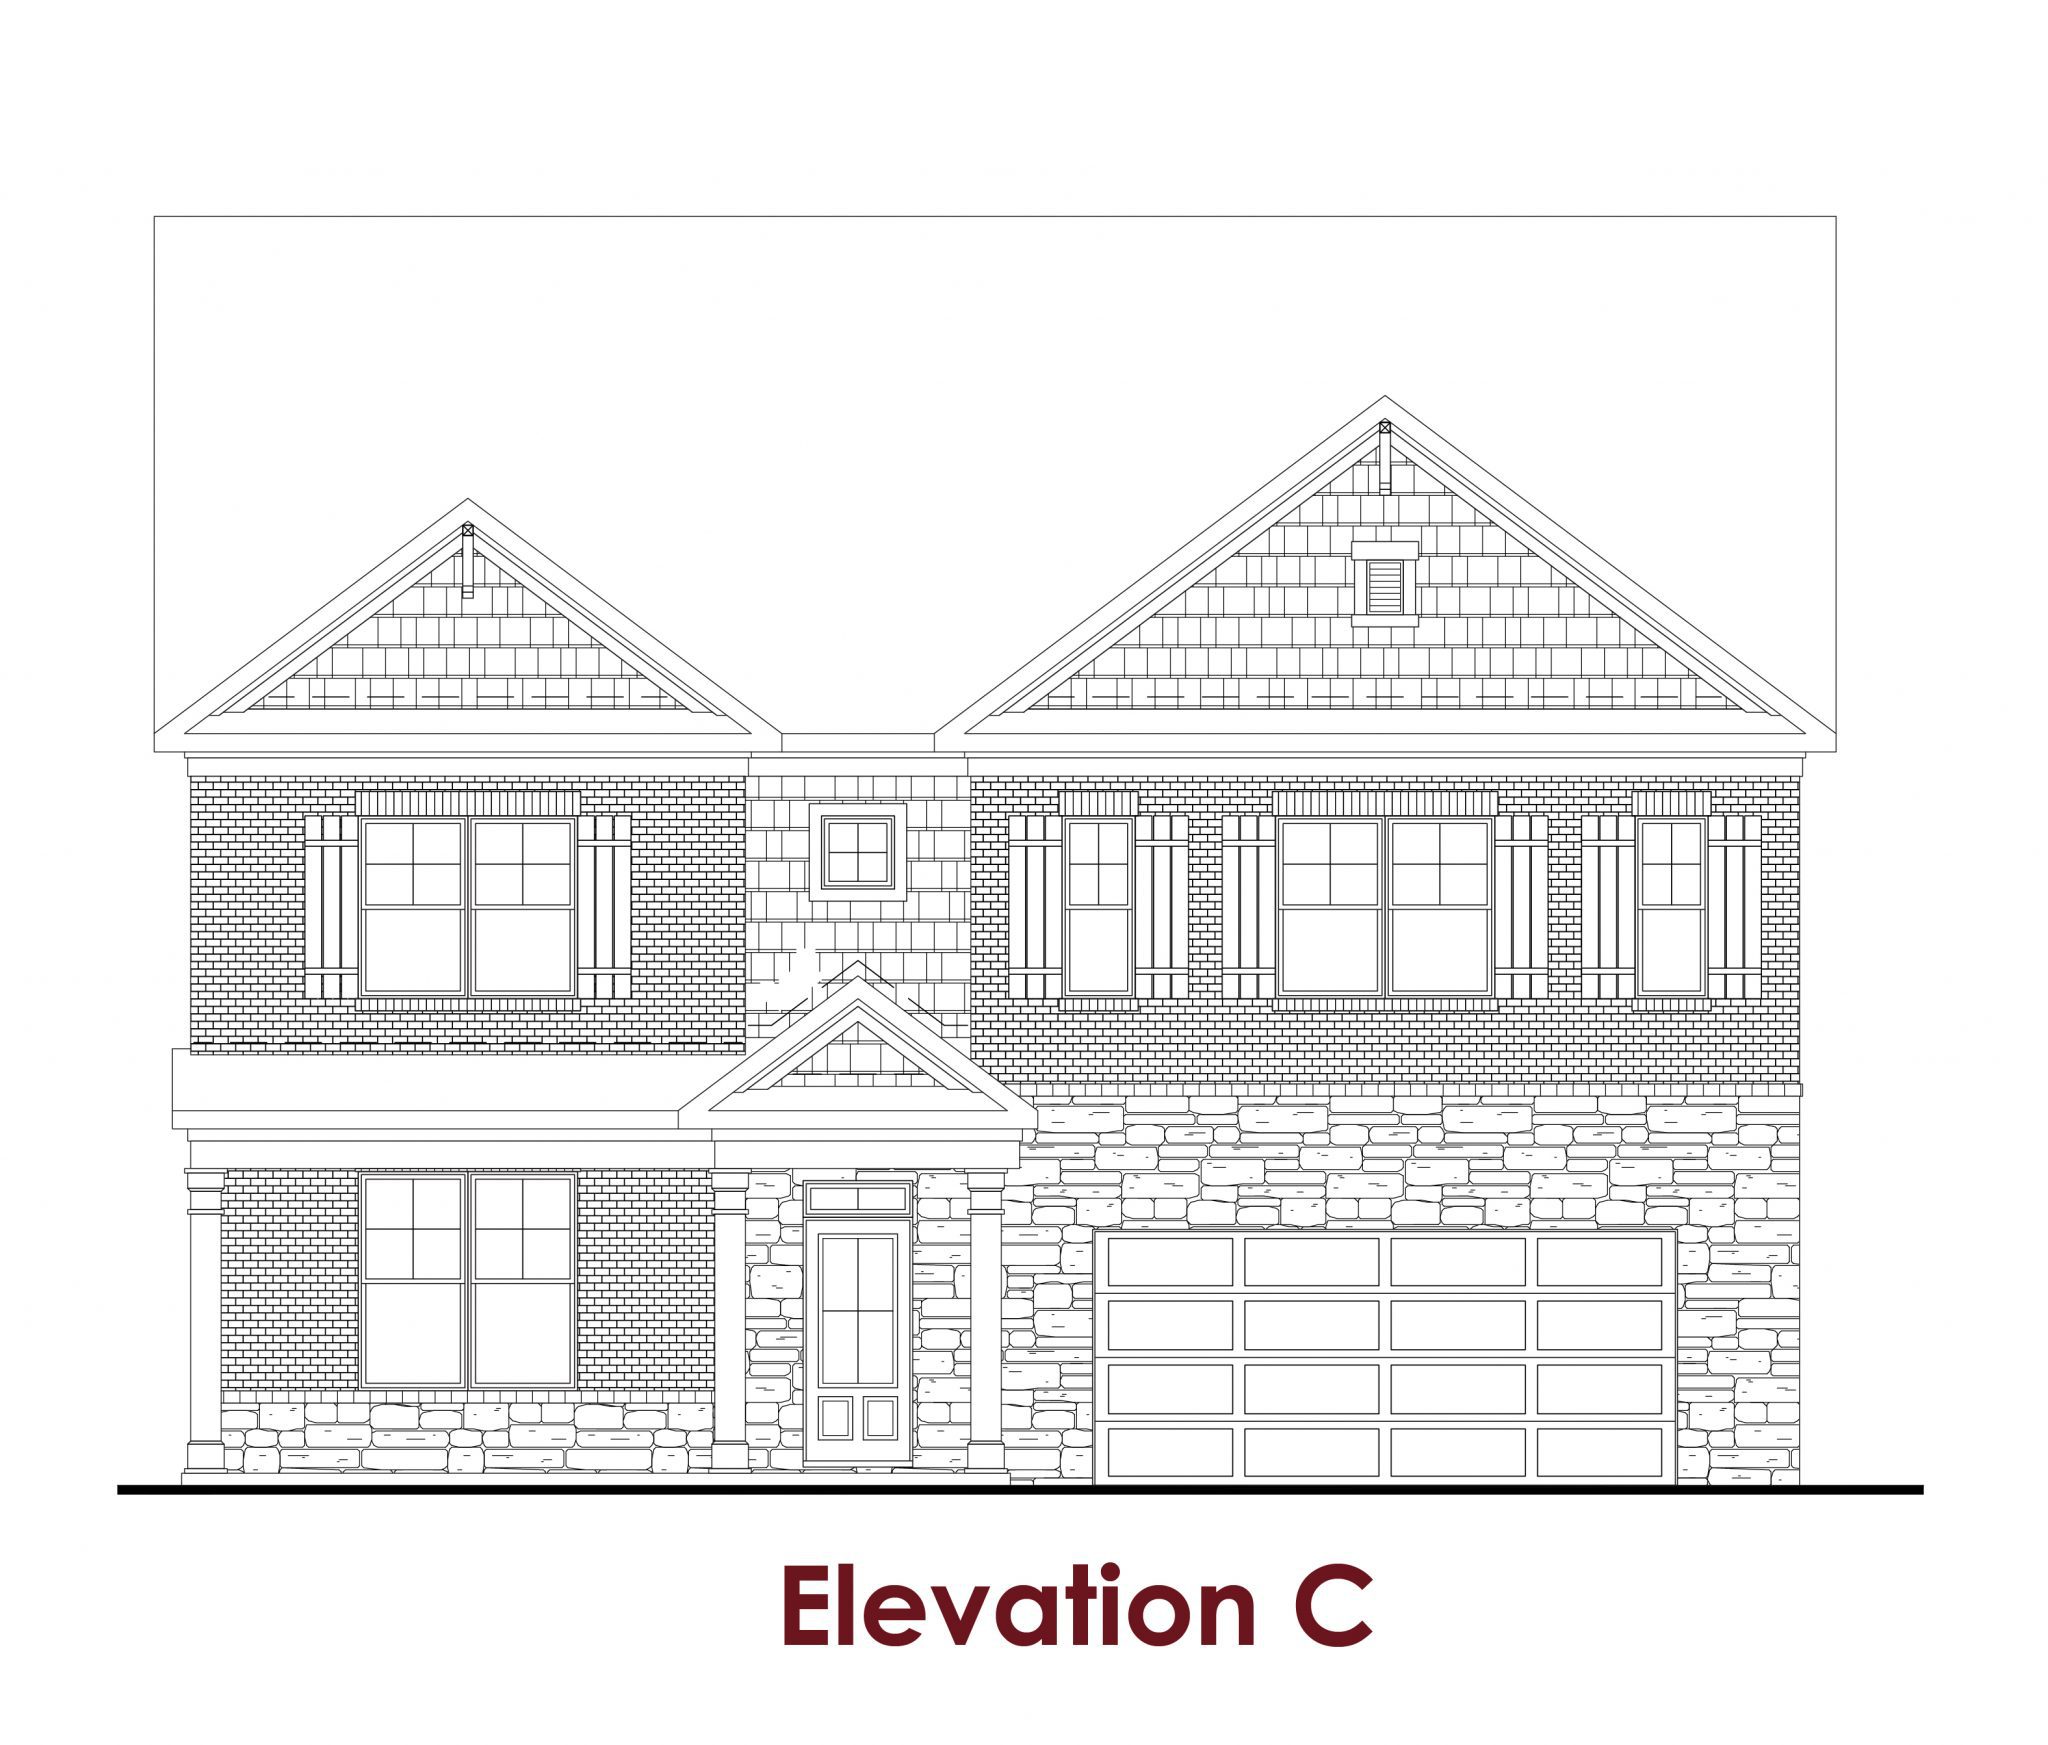 Camelot elevations Image